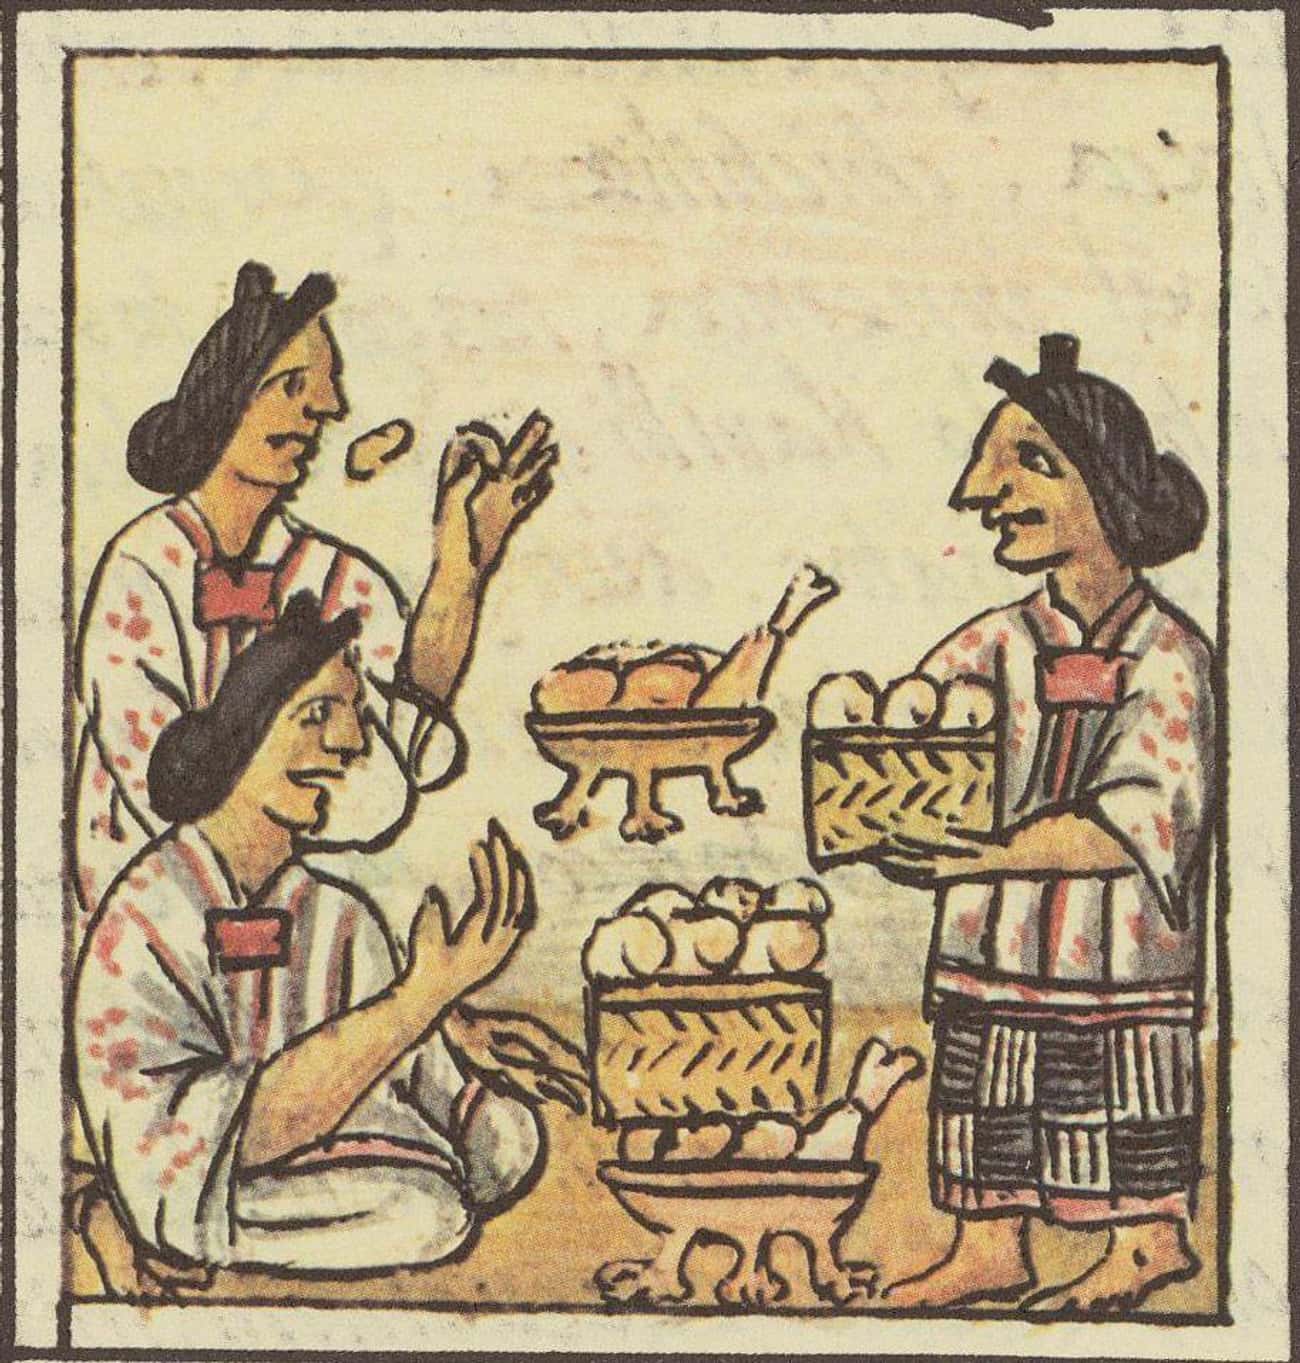 What Was Hygiene Like In The Aztec Empire?